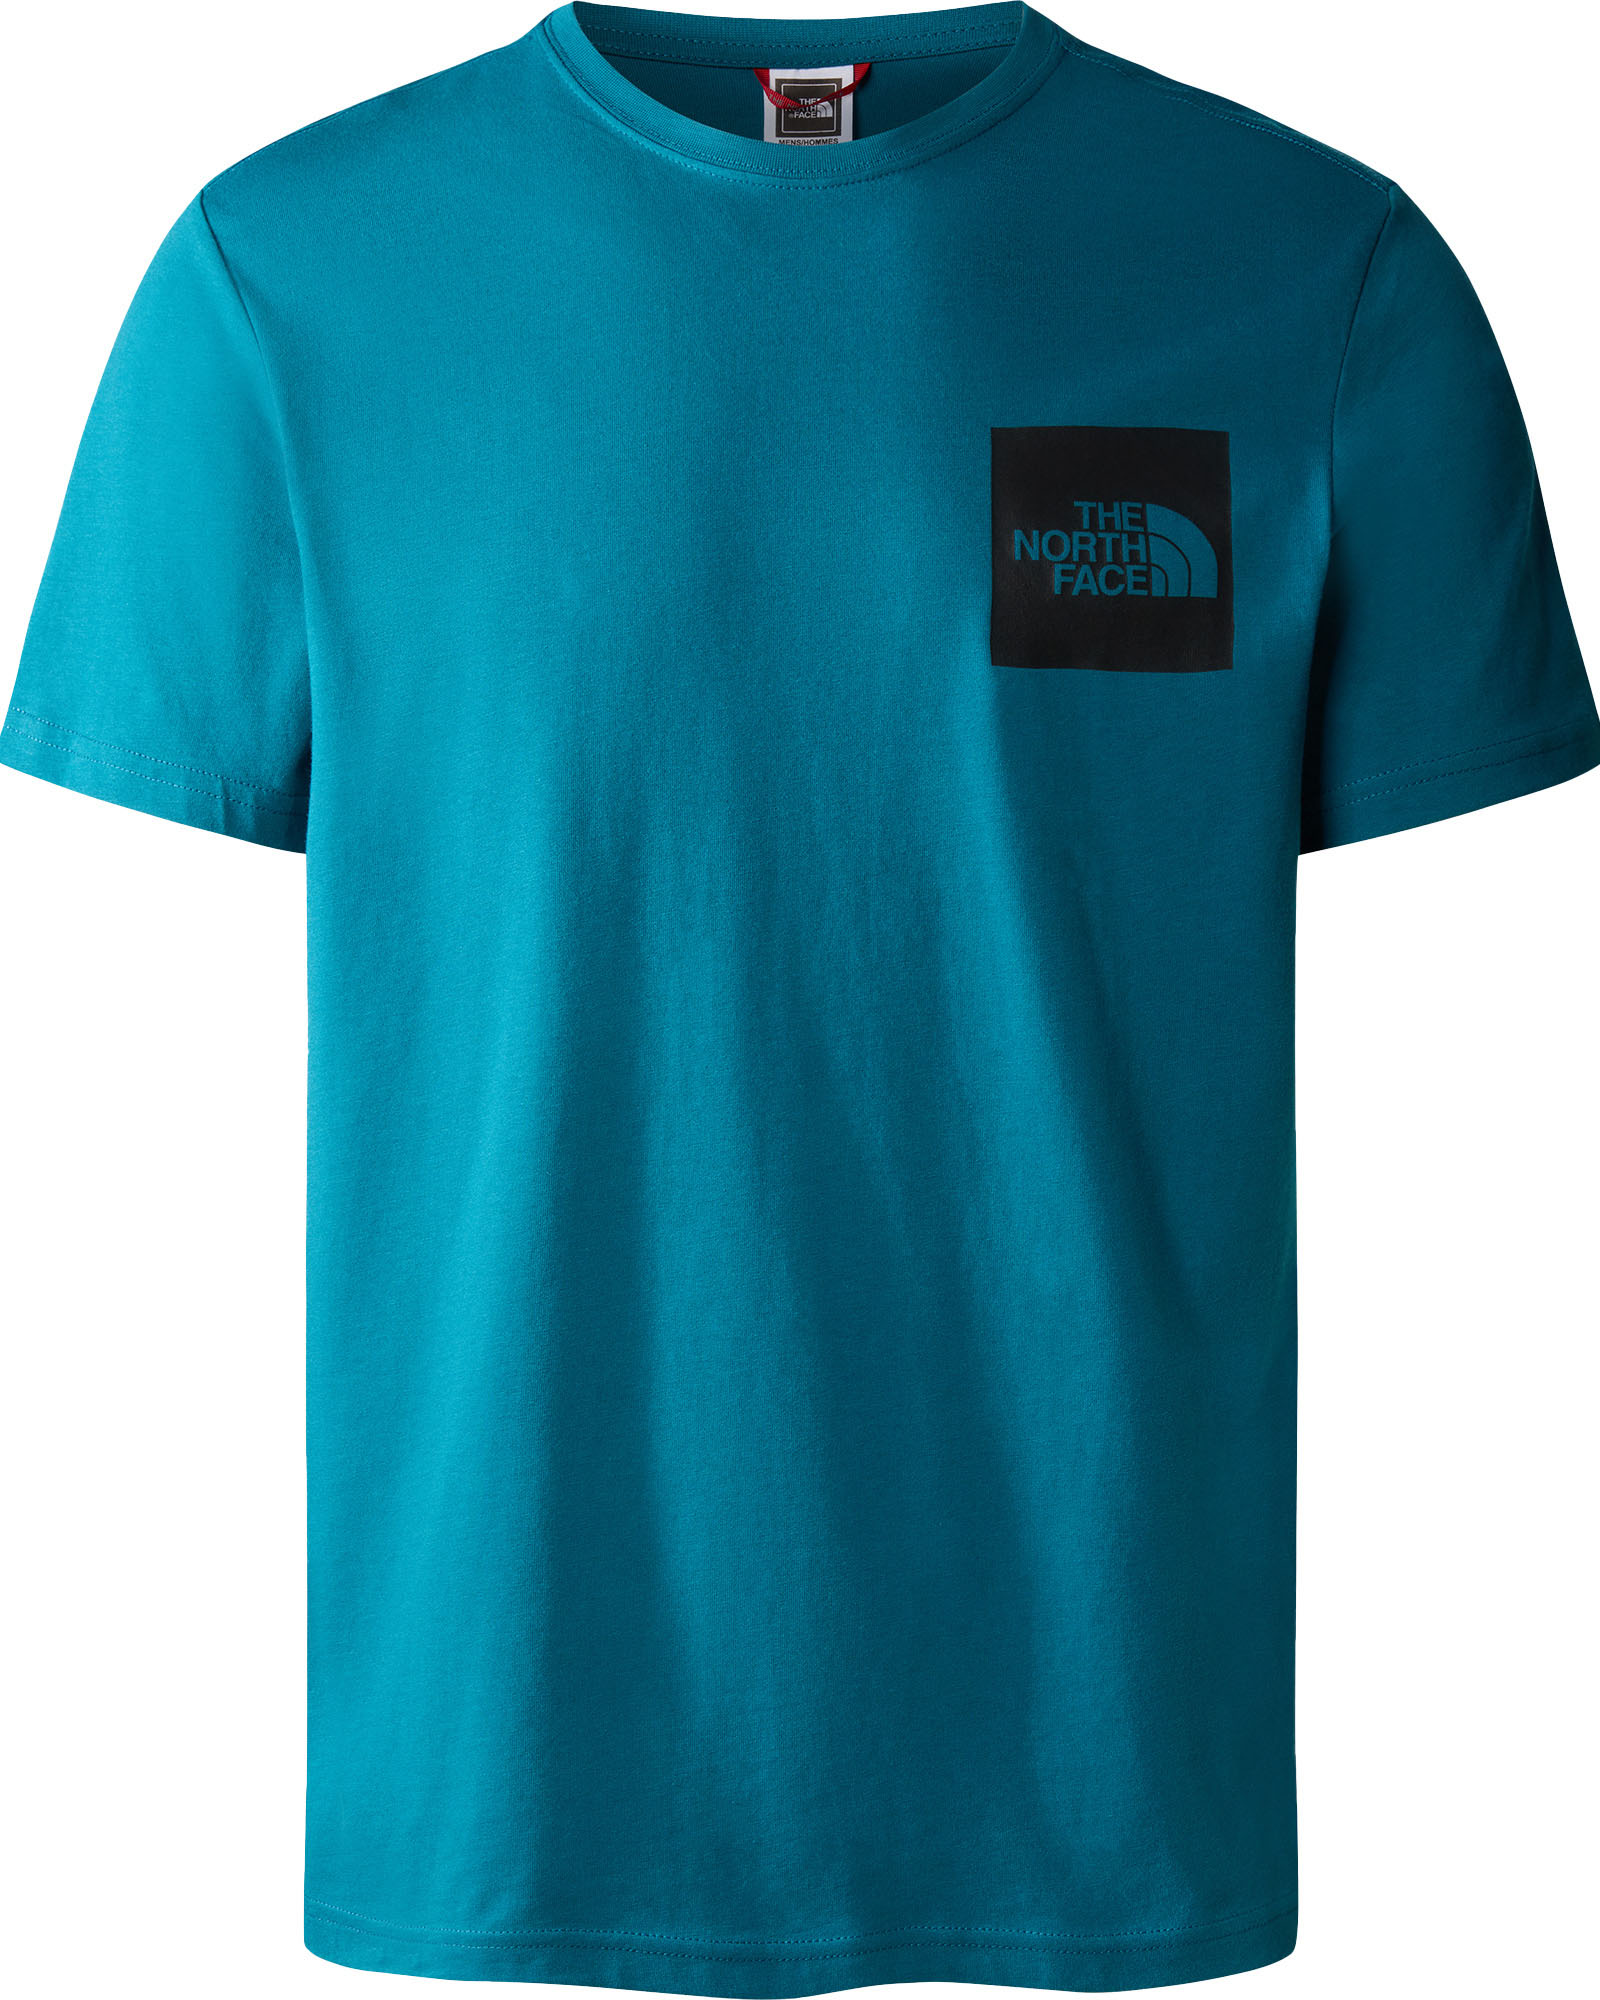 The North Face Fine Men’s Tee - Blue Coral XS